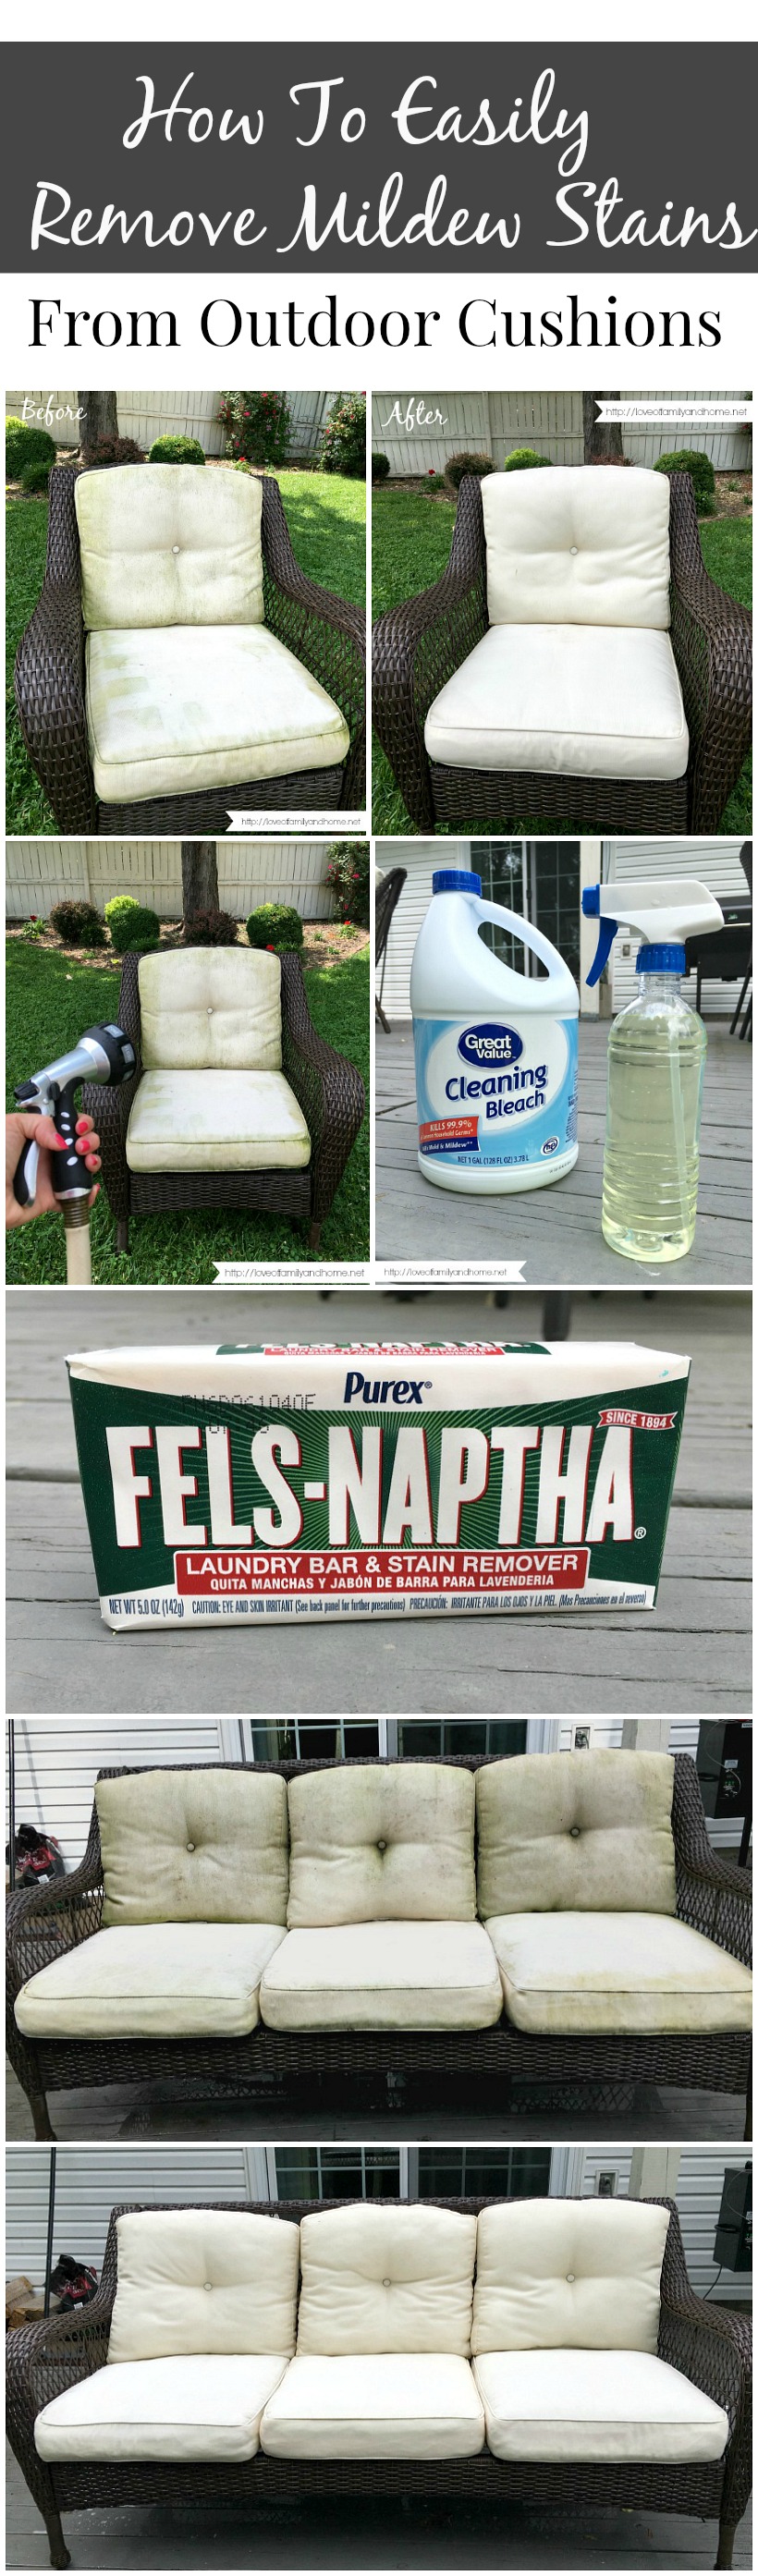 Remove Mildew Stains From Outdoor Cushions, How To Remove Mold From Outdoor Cushion Covers